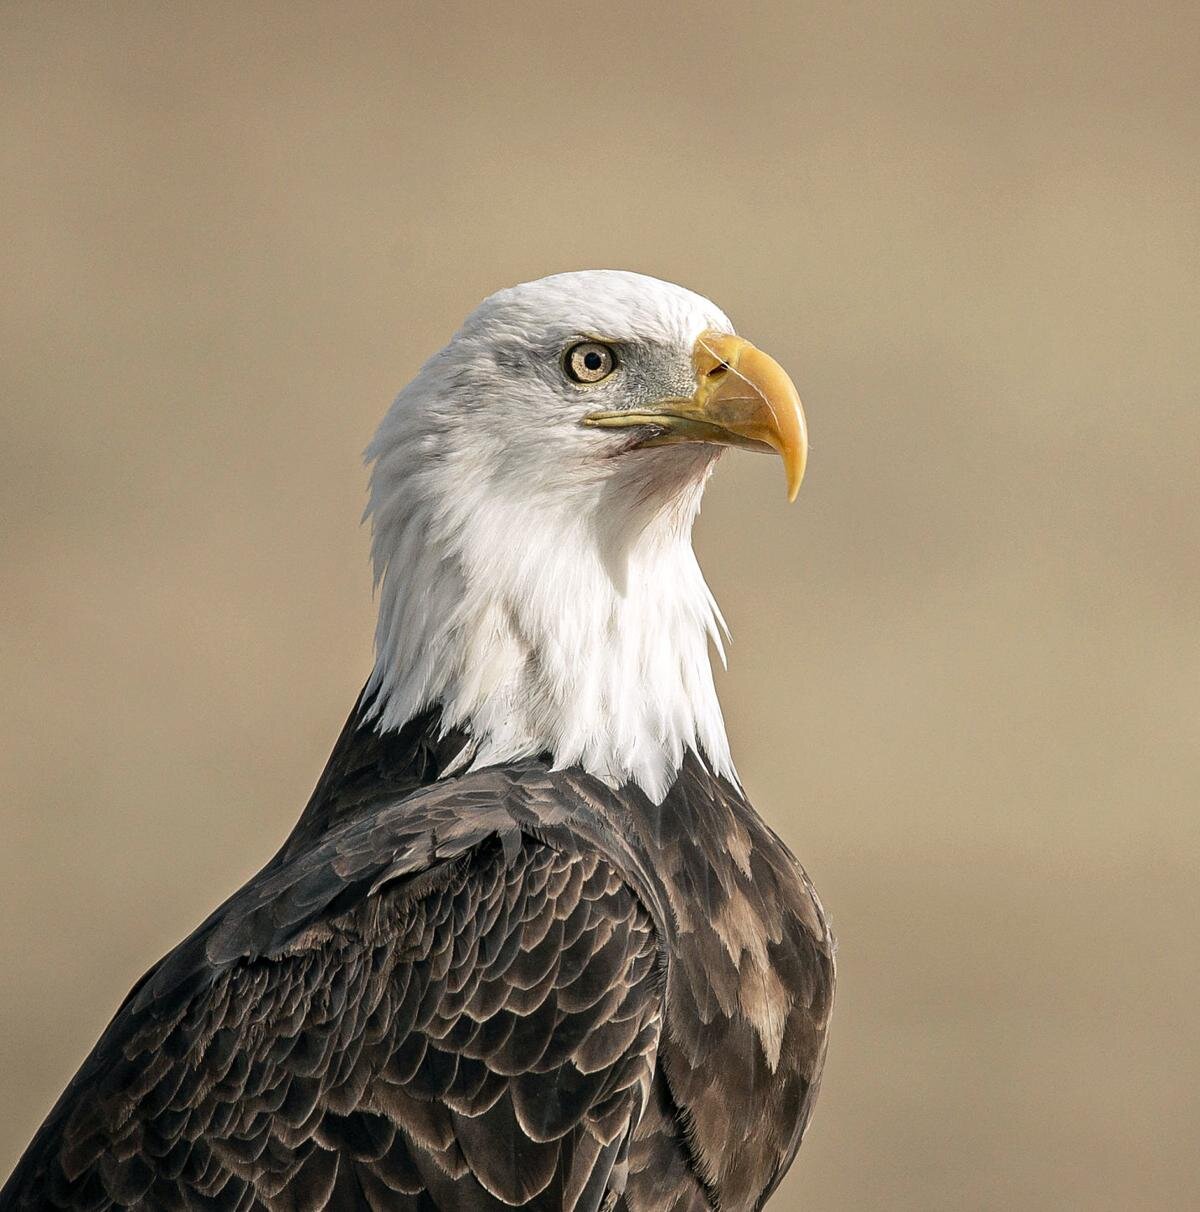 Bald eagles are conservation success story in Bitterroot and beyond —  Teller Wildlife Refuge